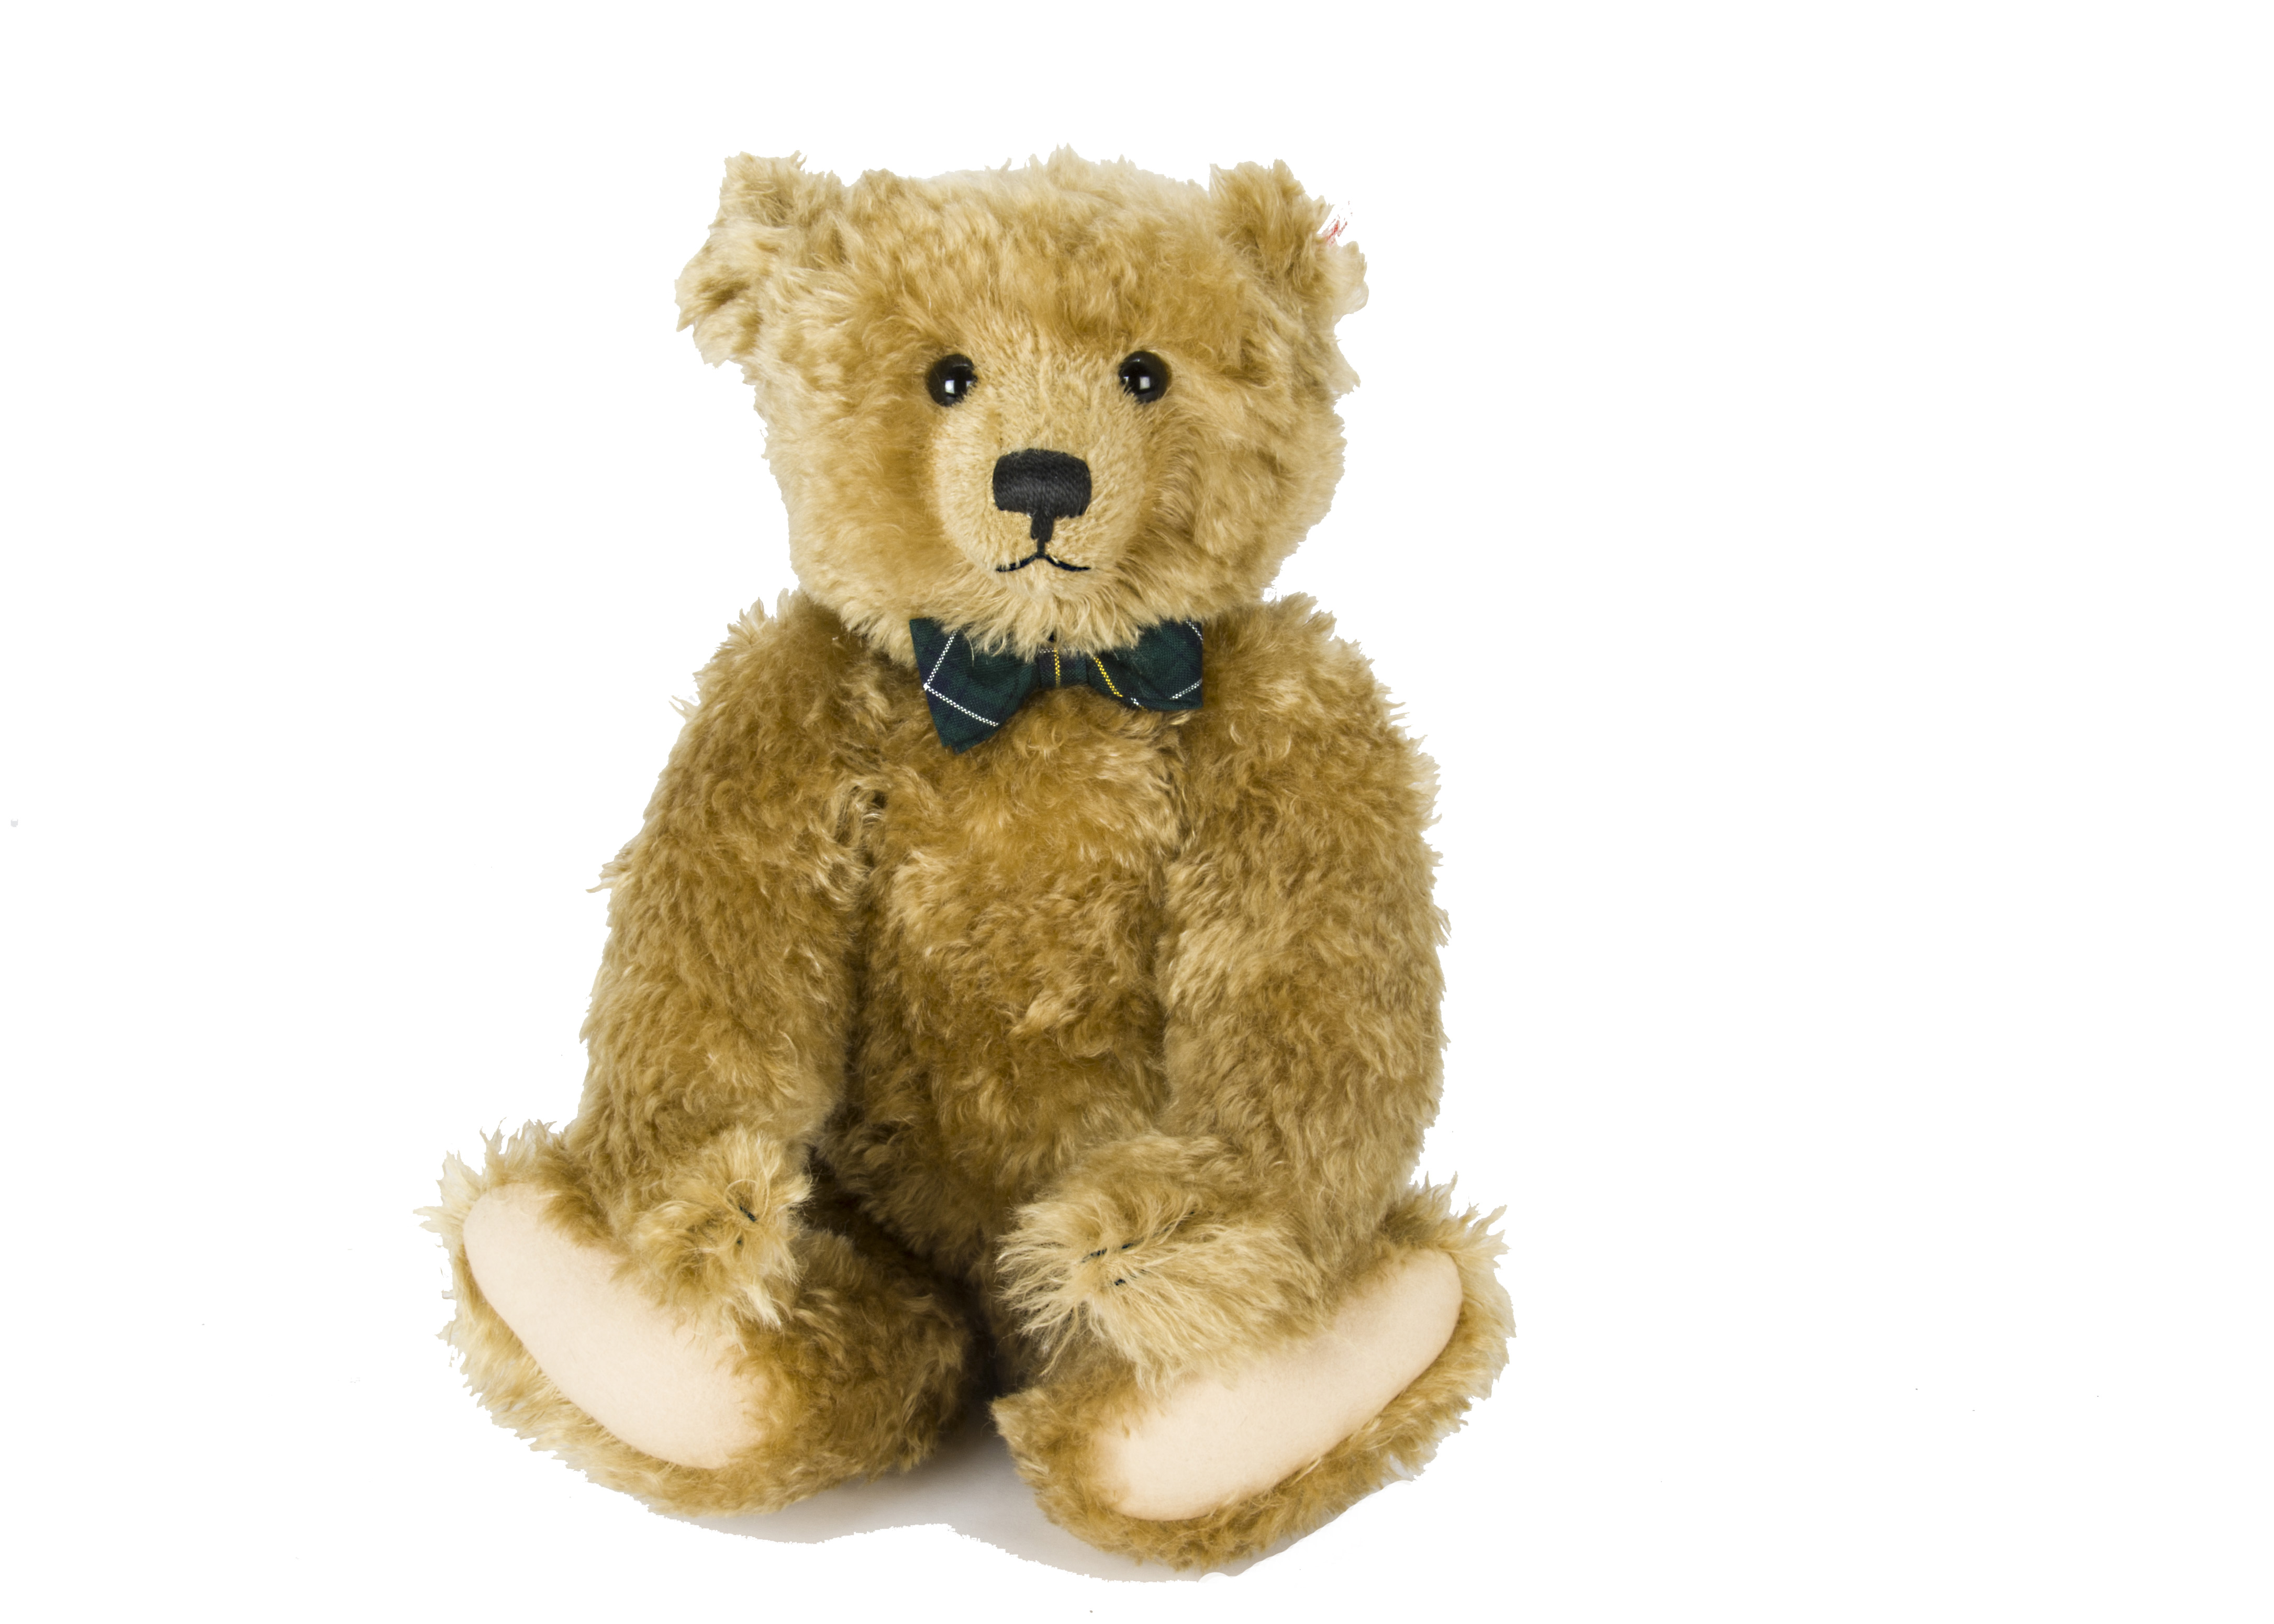 A Steiff Limited Edition for Teddy Bears of Witney Henderson, 1670 of 2000, in original box with